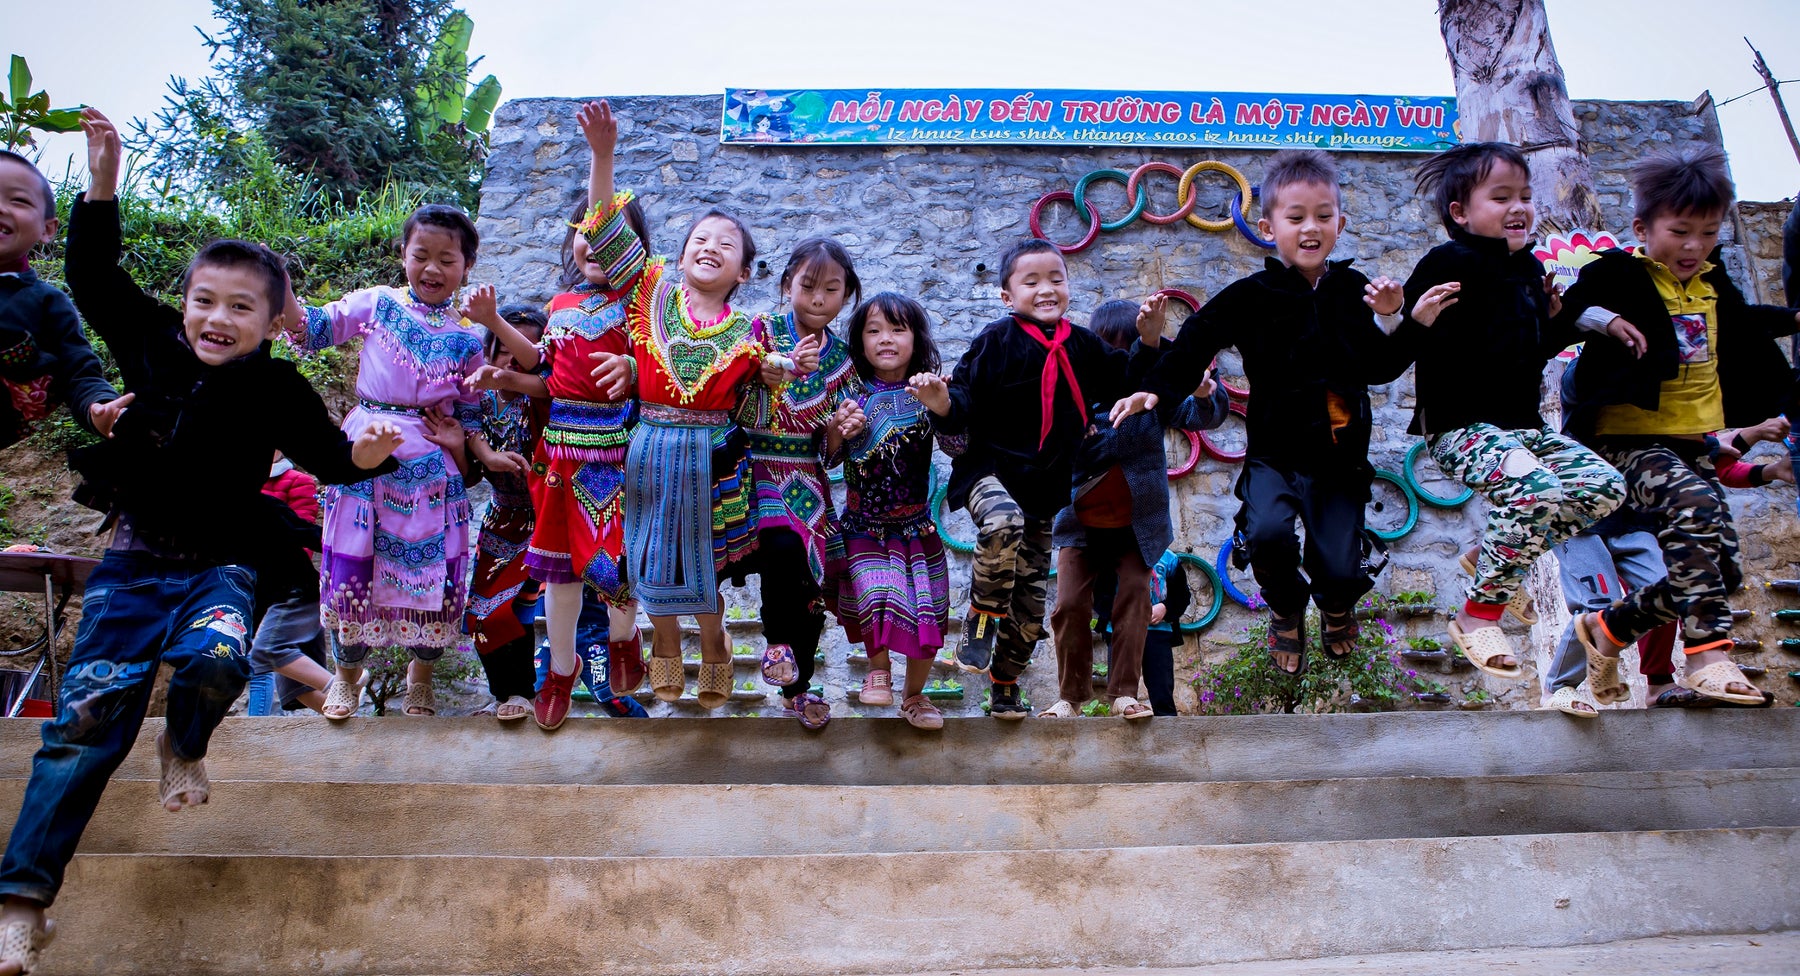 Children happy and jumping